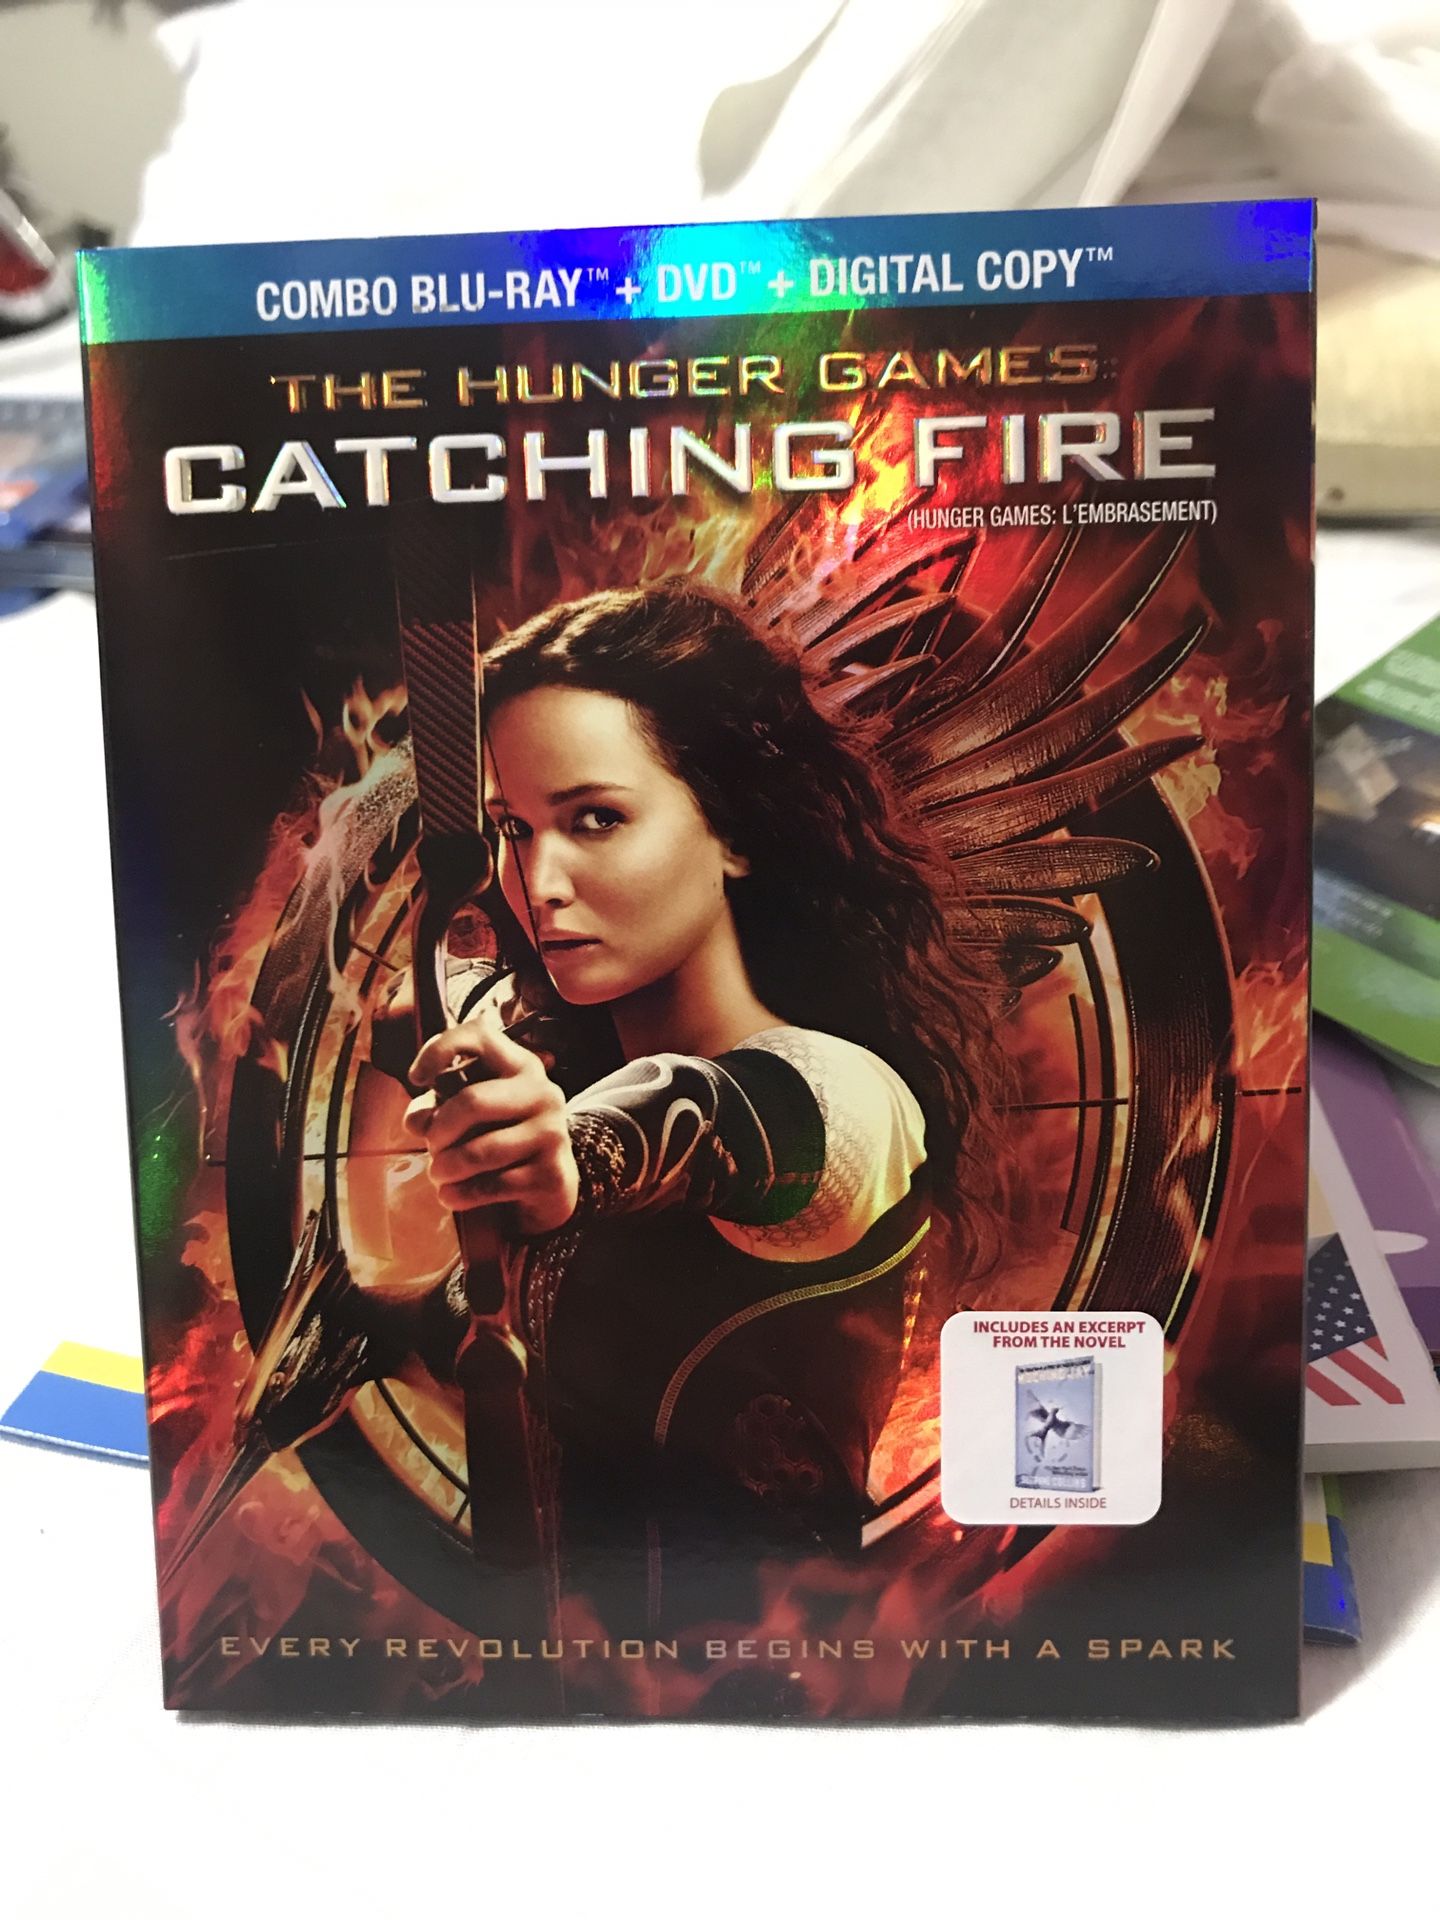 The Hunger Games Catching Fire / Combo BluRay & DVD & Digital Copy